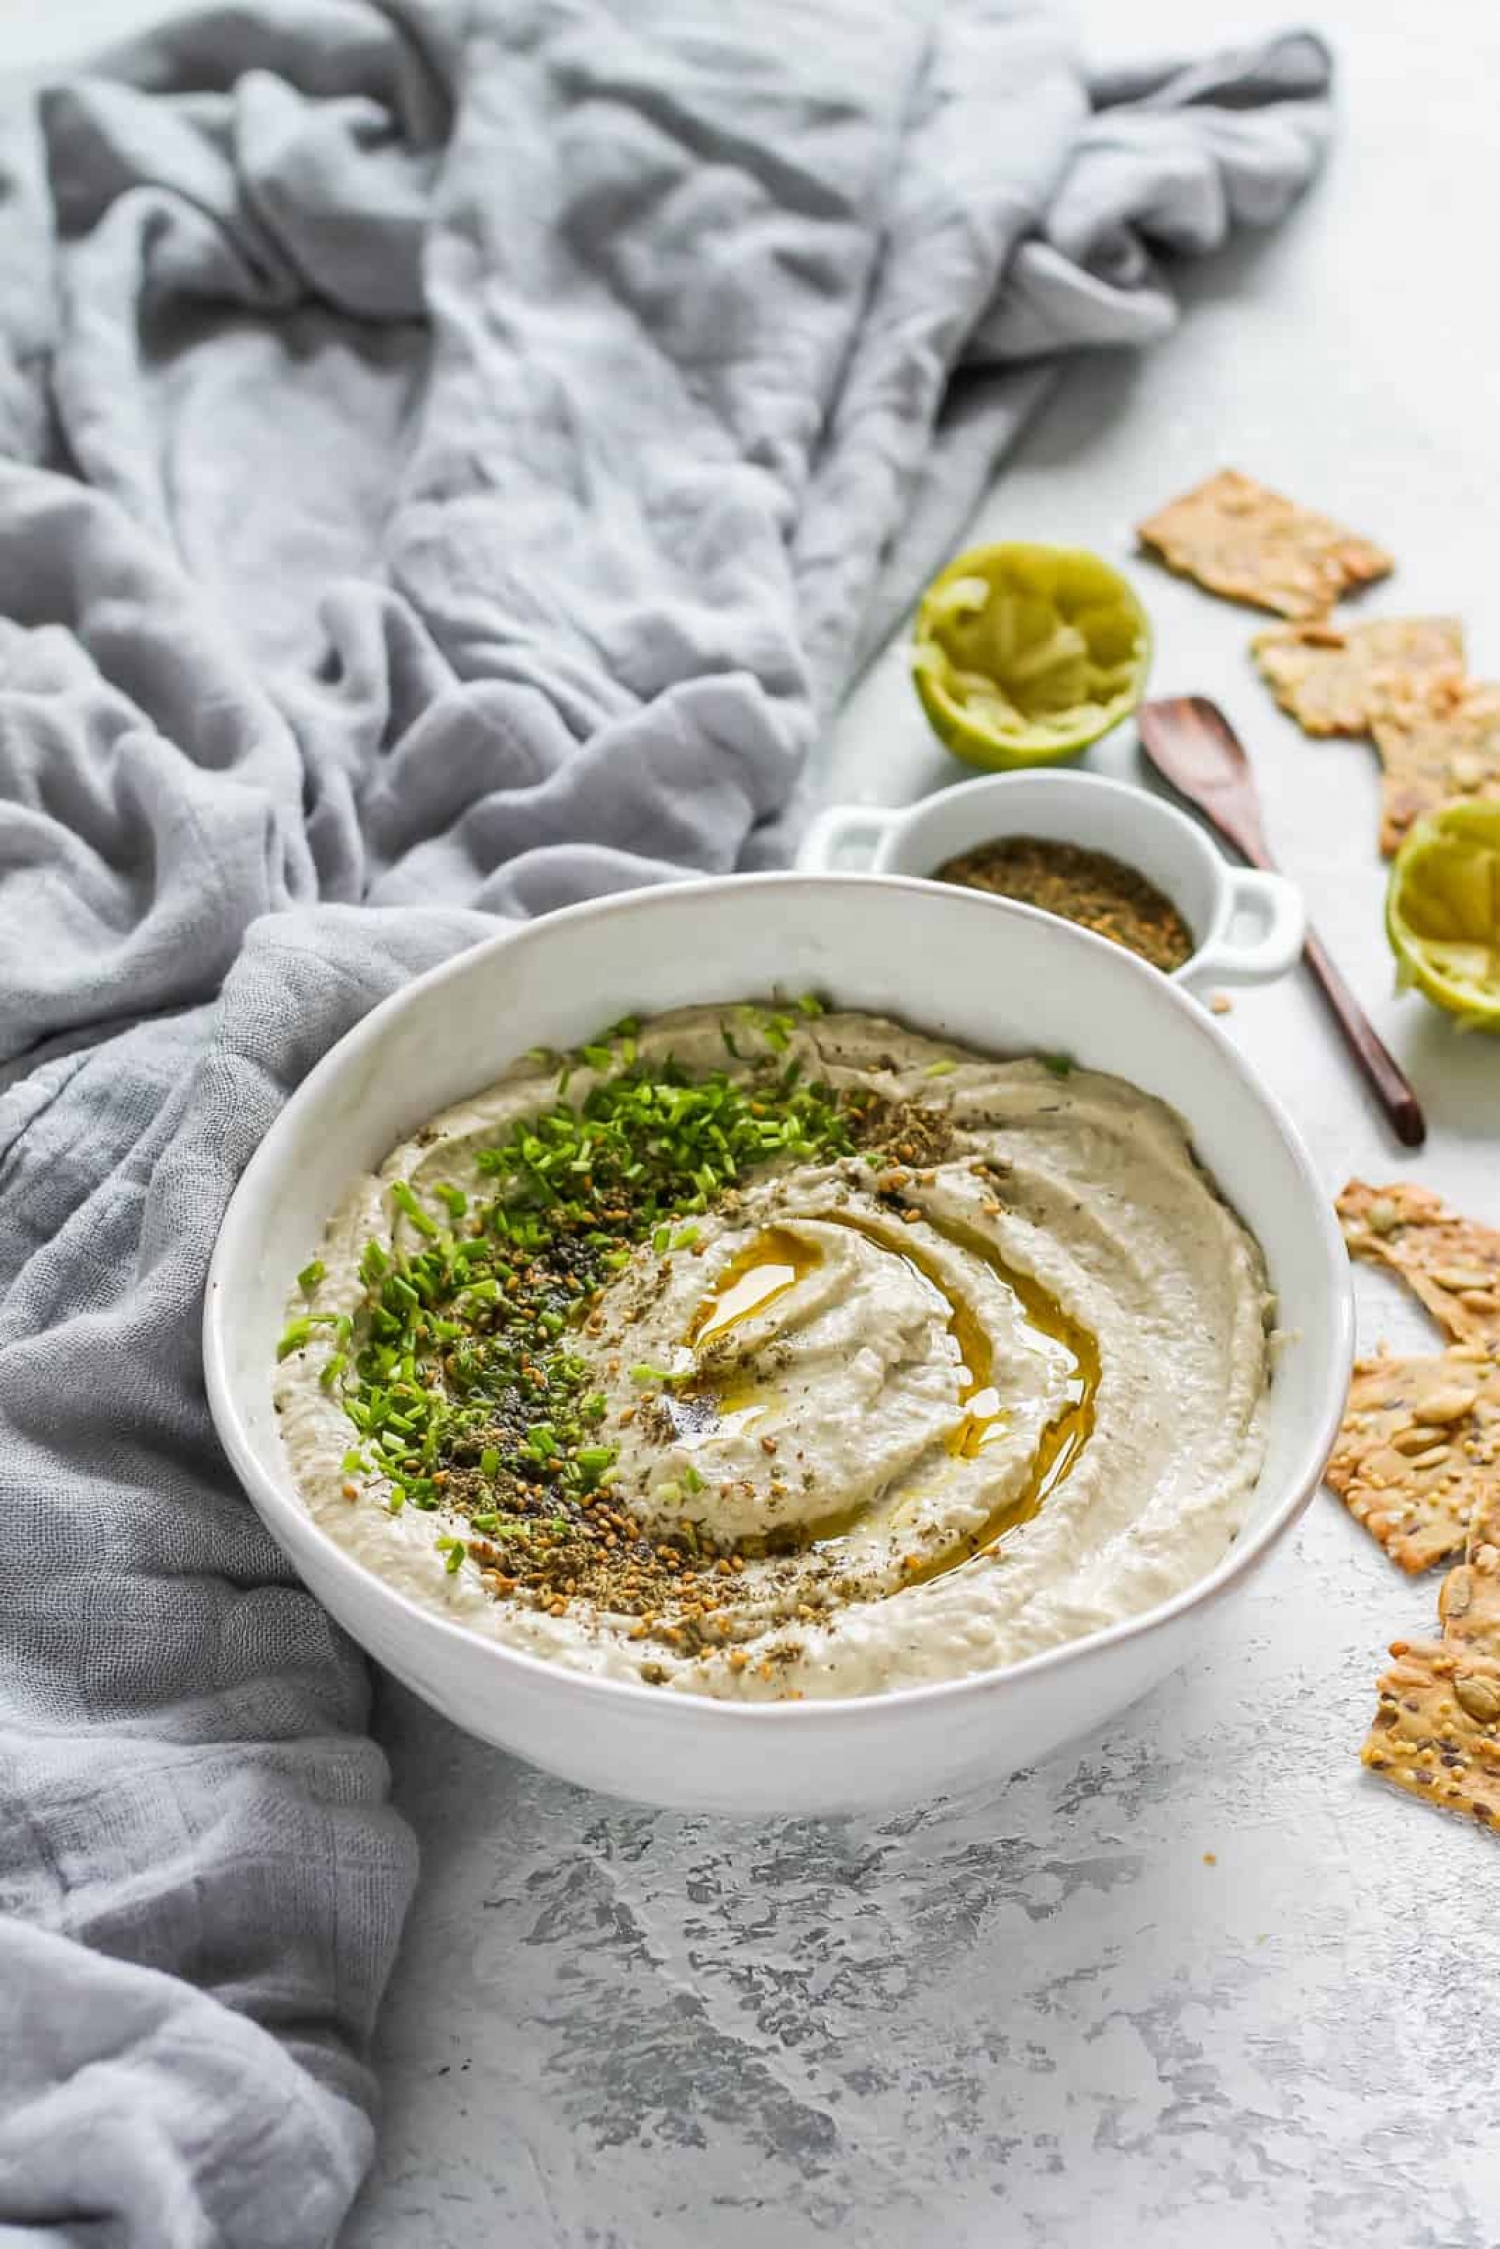 <p>If you're feeling like something besides classic chickpea hummus, it's time to get creative with other beans! <a href="https://www.heynutritionlady.com/next-level-hummus/" rel="noopener">This recipe</a> uses mung beans, which lend a slightly sweet flavor that combines well with tahini, lime and garlic.</p>